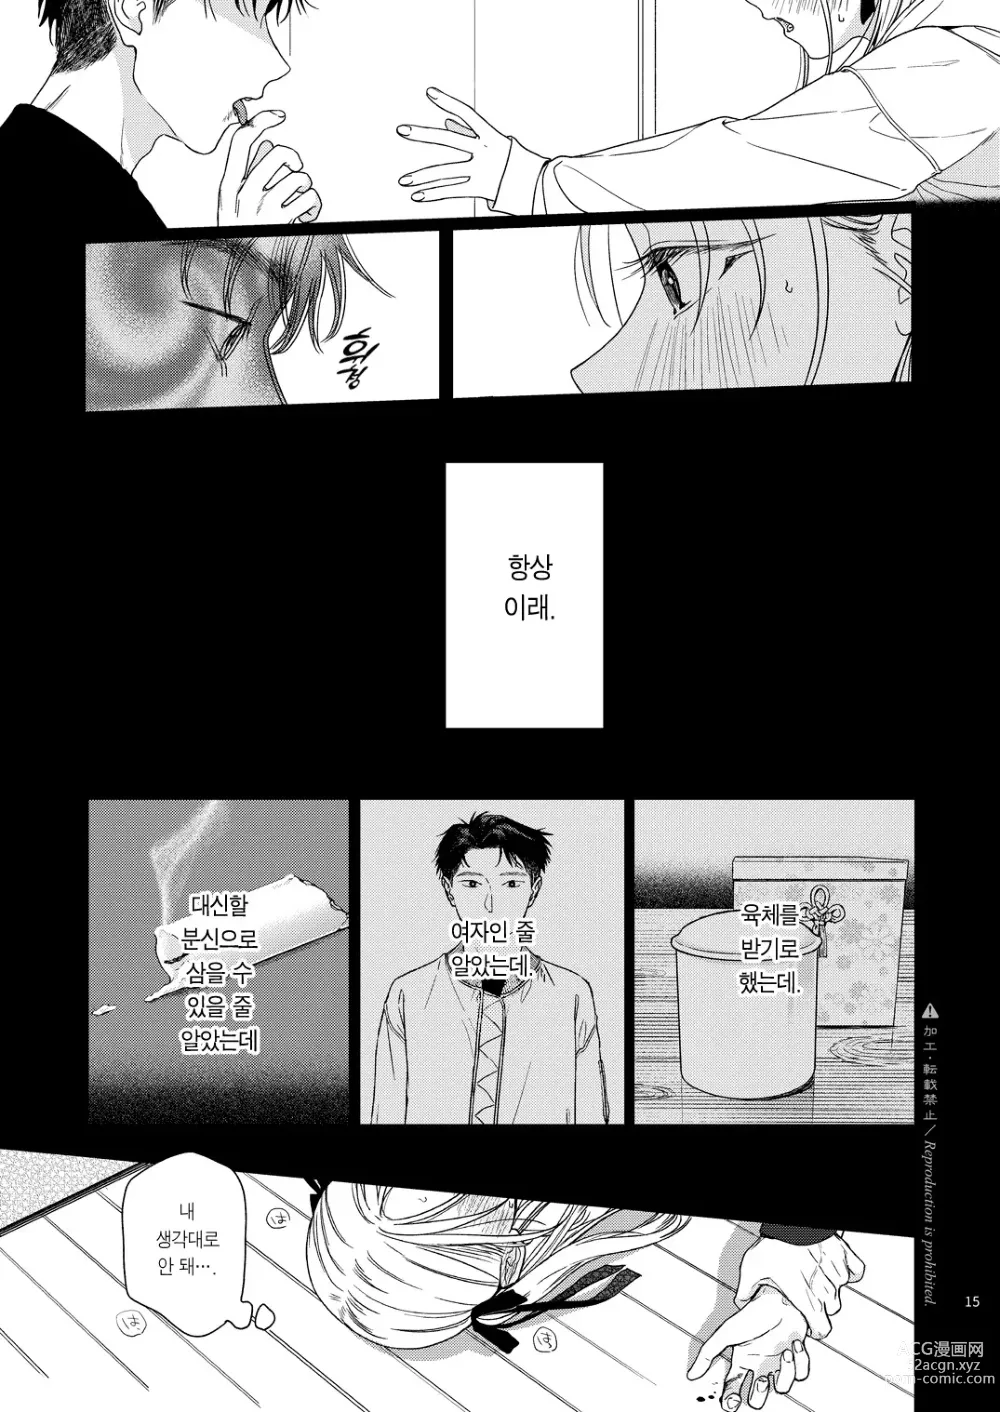 Page 16 of doujinshi 카타미와 월맹